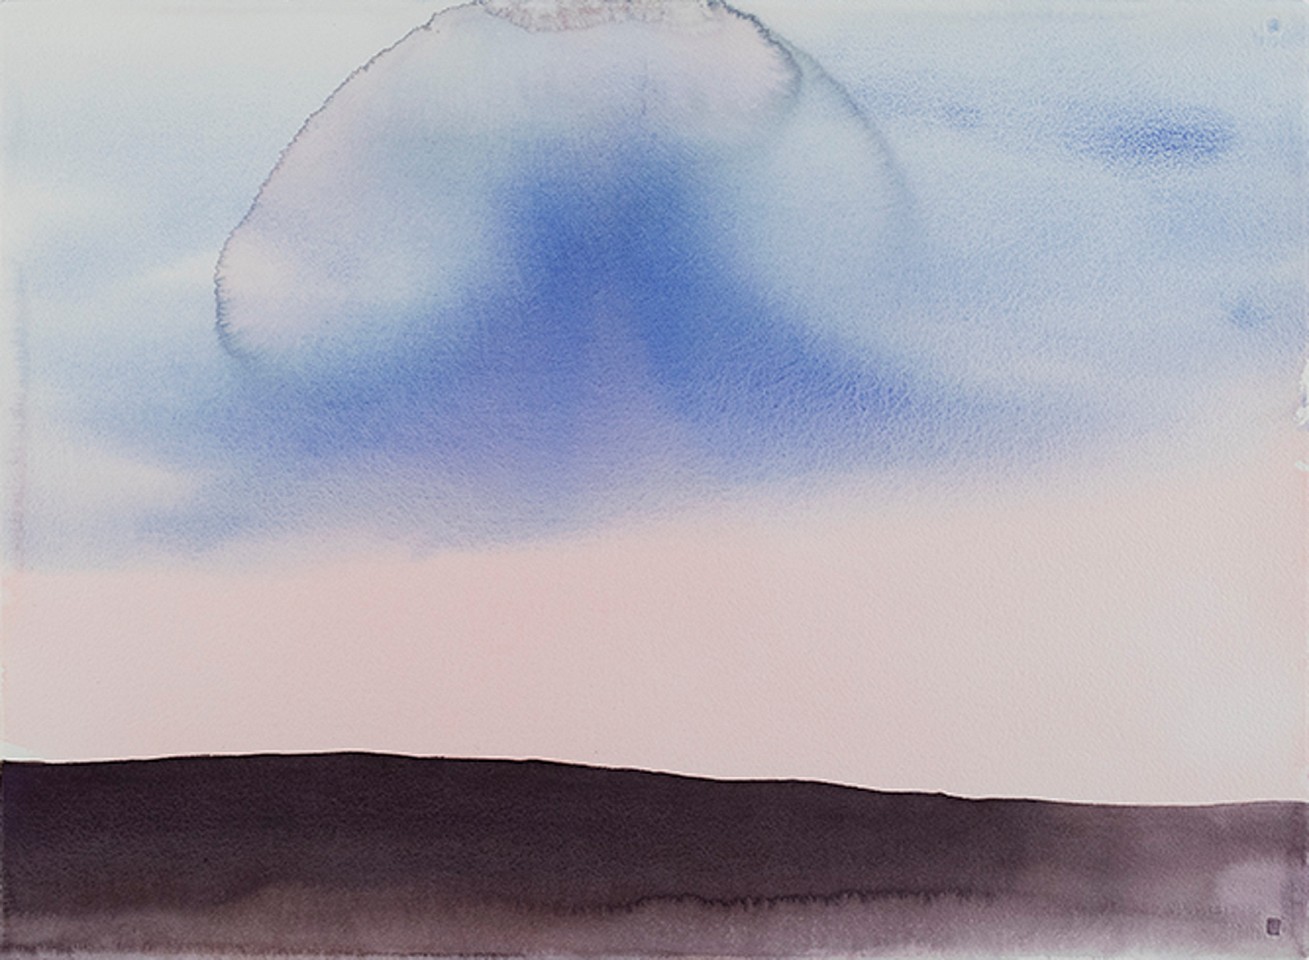 Shawn Dulaney (LA)
Momentary III, 2020
DULAN1093
watercolor on paper, 22 1/2 x 30 inches